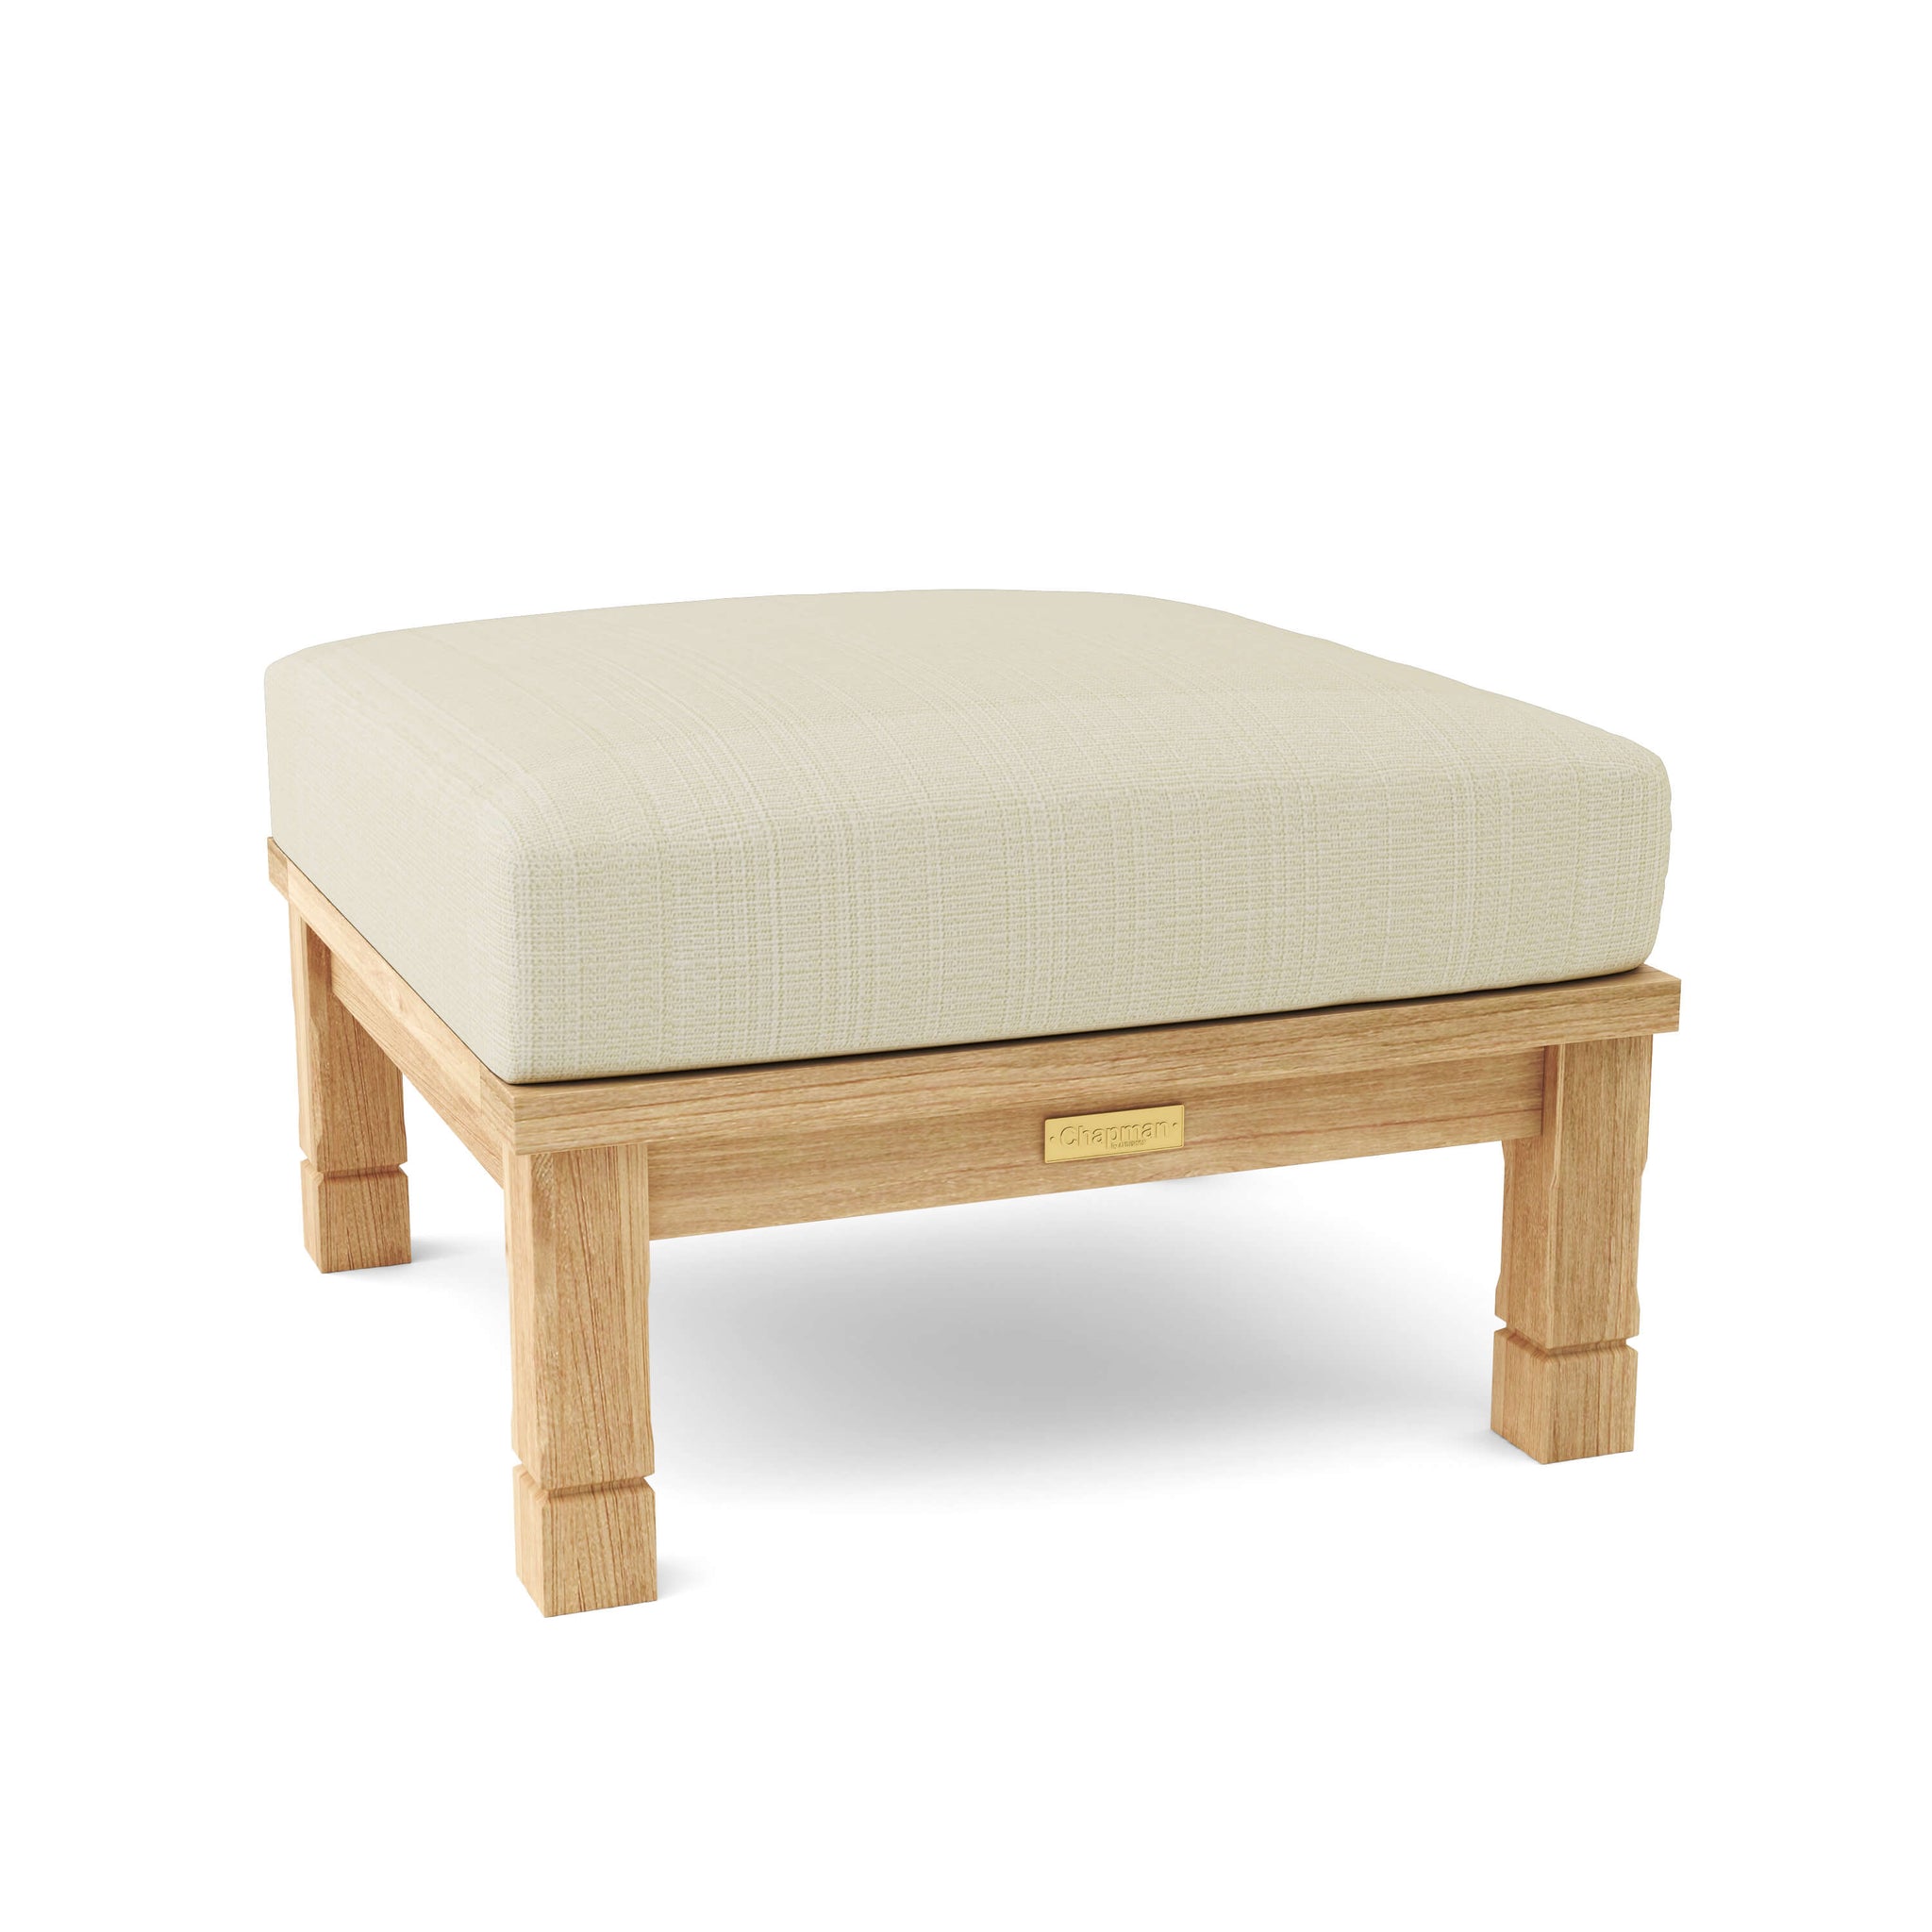 Anderson Teak SouthBay Deep Seating Ottoman DS-3016